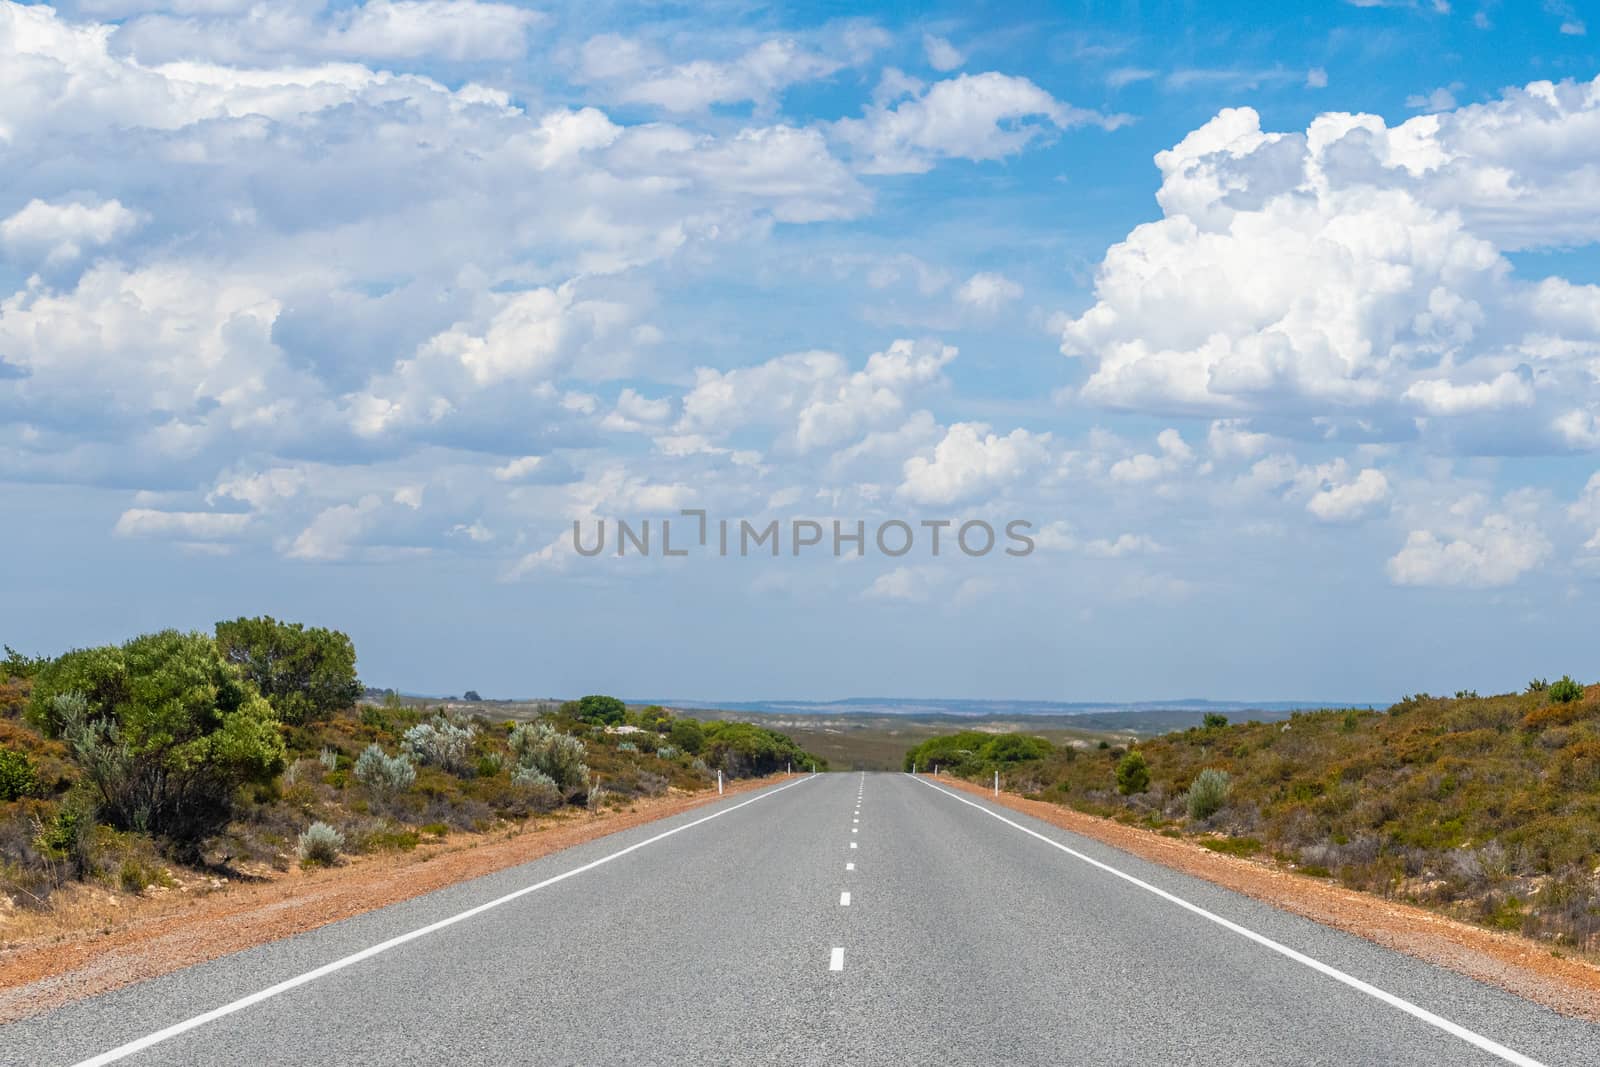 Straight and empty road close to The Pinnacles Desert in Western Australia by MXW_Stock